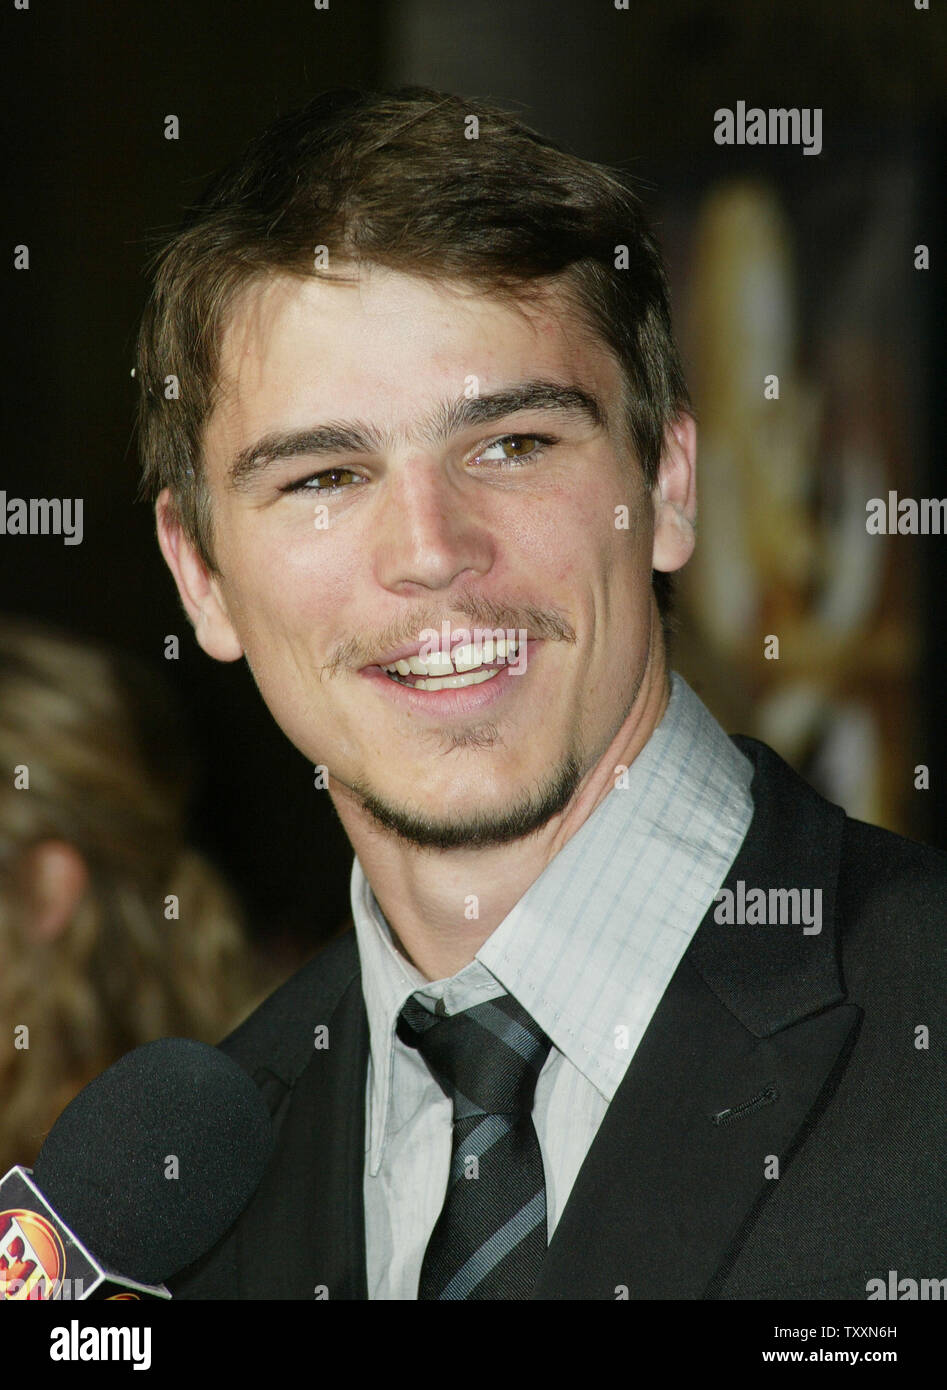 Actor Josh Hartnett poses for photographers at the premiere of the film, 'Wicker Park',  in Los Angeles on August 31, 2004. Hartnett stars in the  MGM film that is based on the motion picture, 'L'Appartement' and  opens in the U.S. on September 3rd. (UPI Photo/Francis Specker) Stock Photo